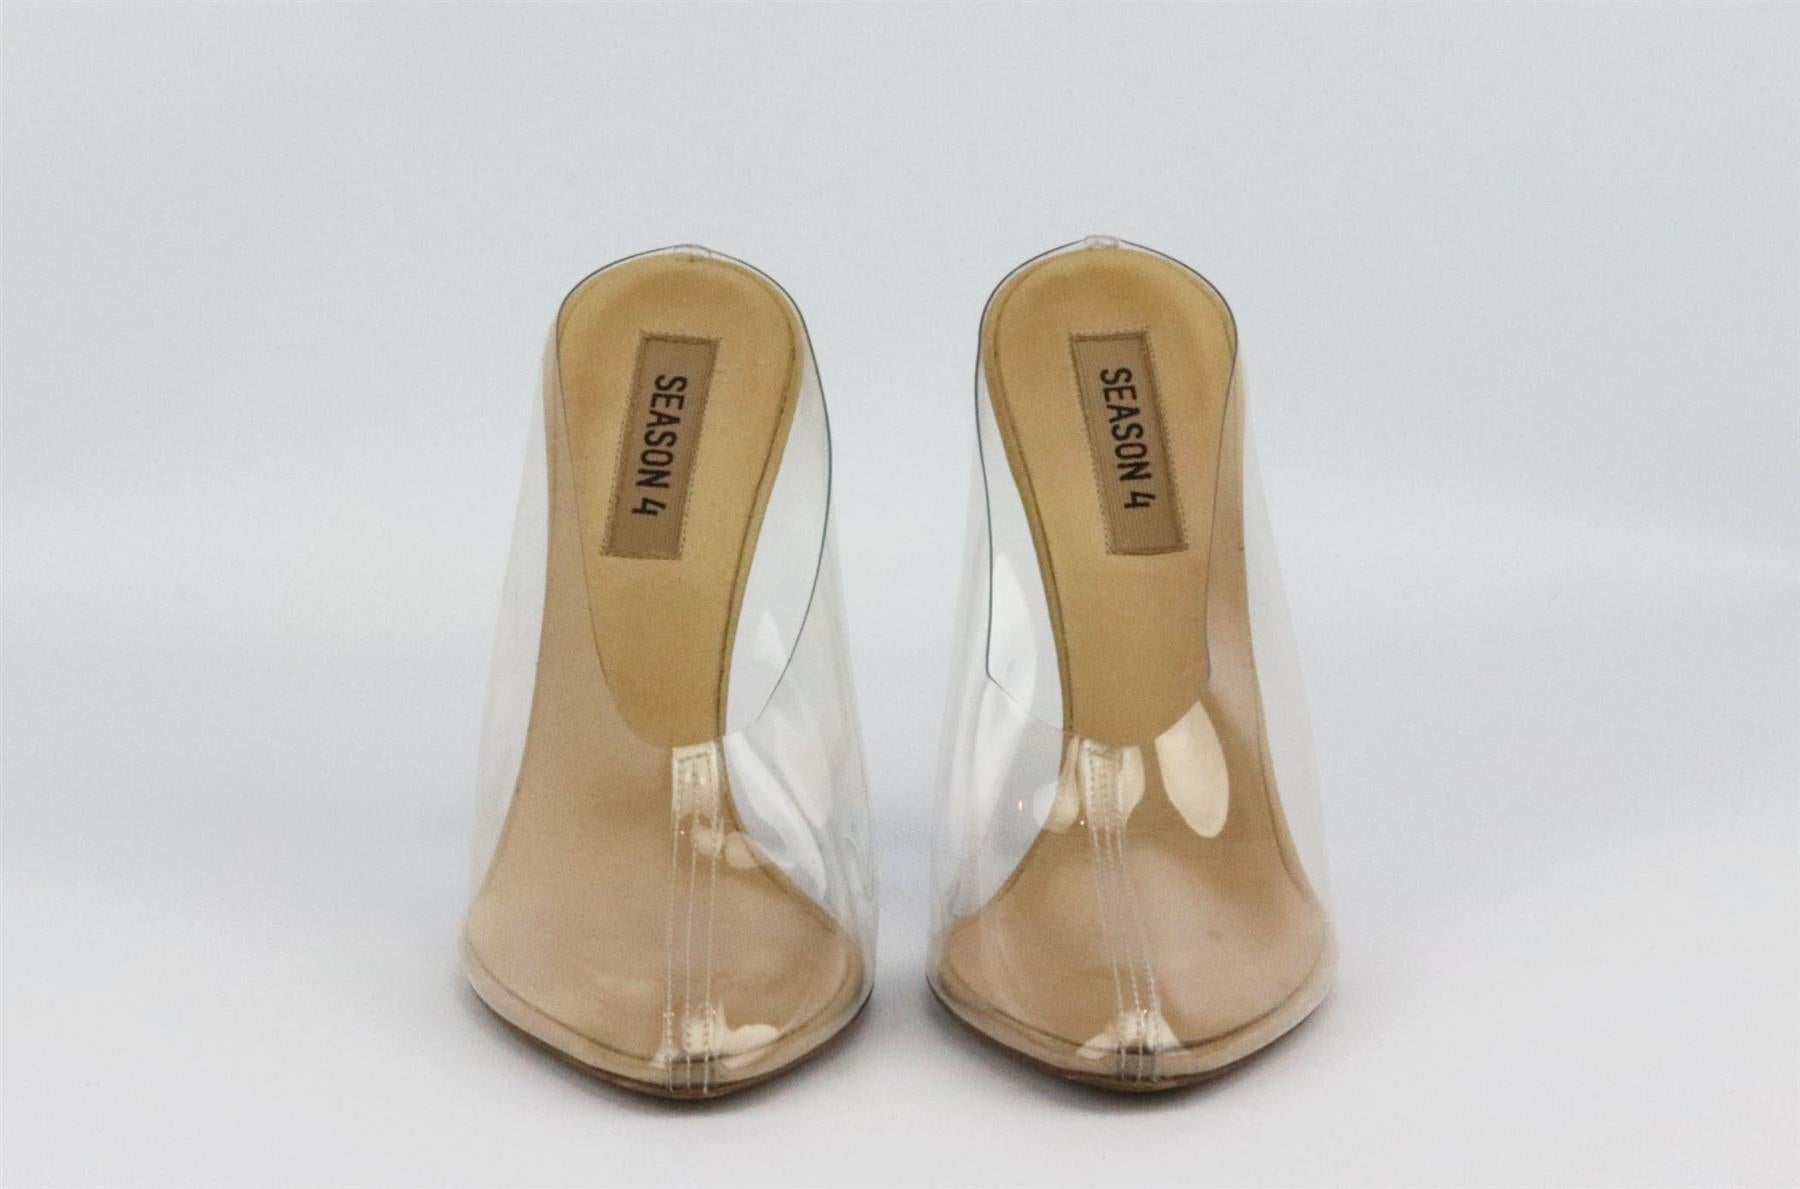 These mules by Yeezy have been handmade in Italy from glossy leather and have sheer PVC case that molds to the shape of your feet, they're designed with sharply pointed toes and set on 101mm curved wedge heels that lengthen your legs. Heel measures